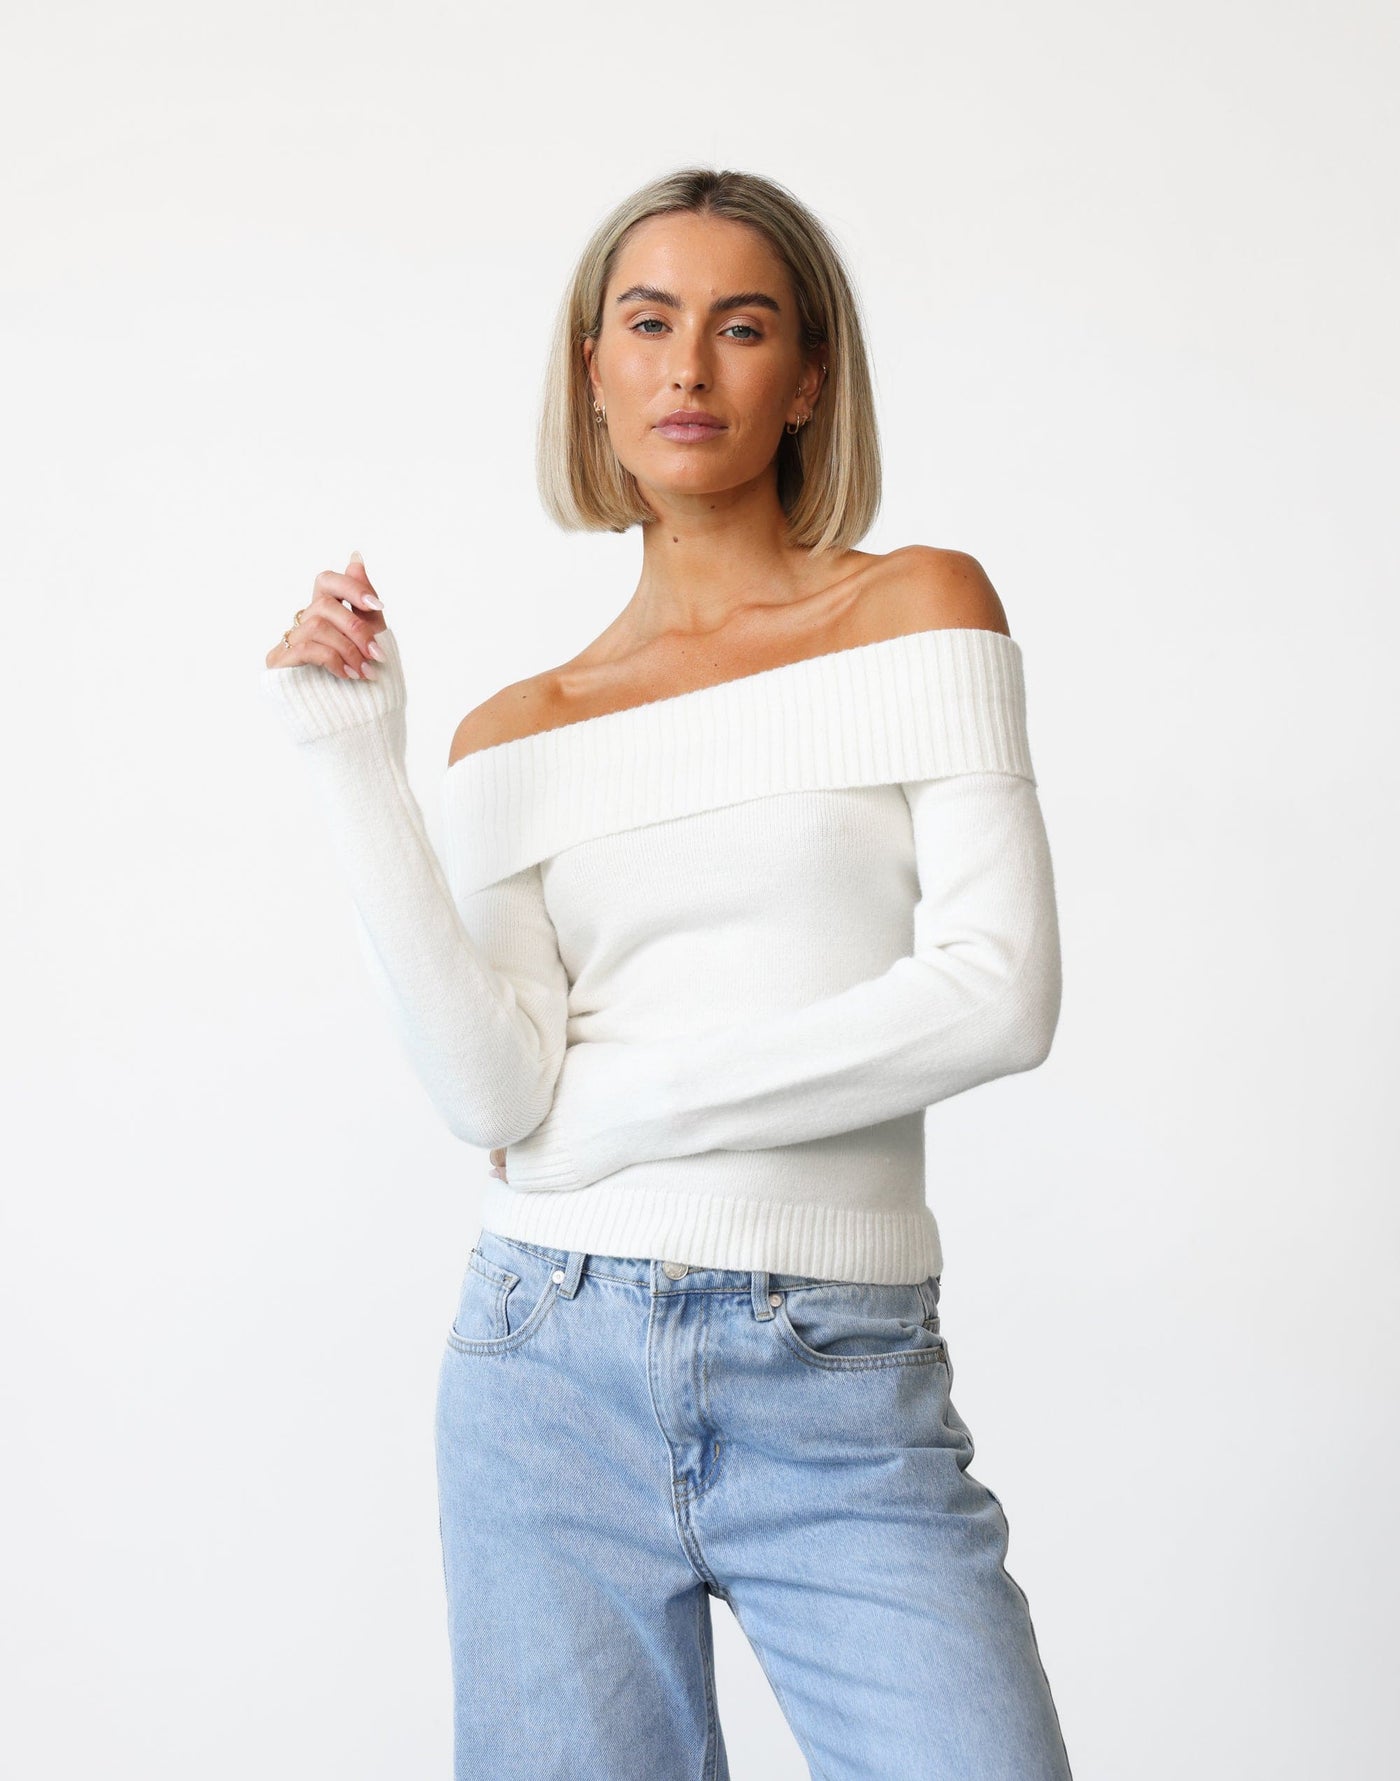 Hillary Jumper (White) - Off Shoulder Ribbed Detail Jumper - Women's Top - Charcoal Clothing